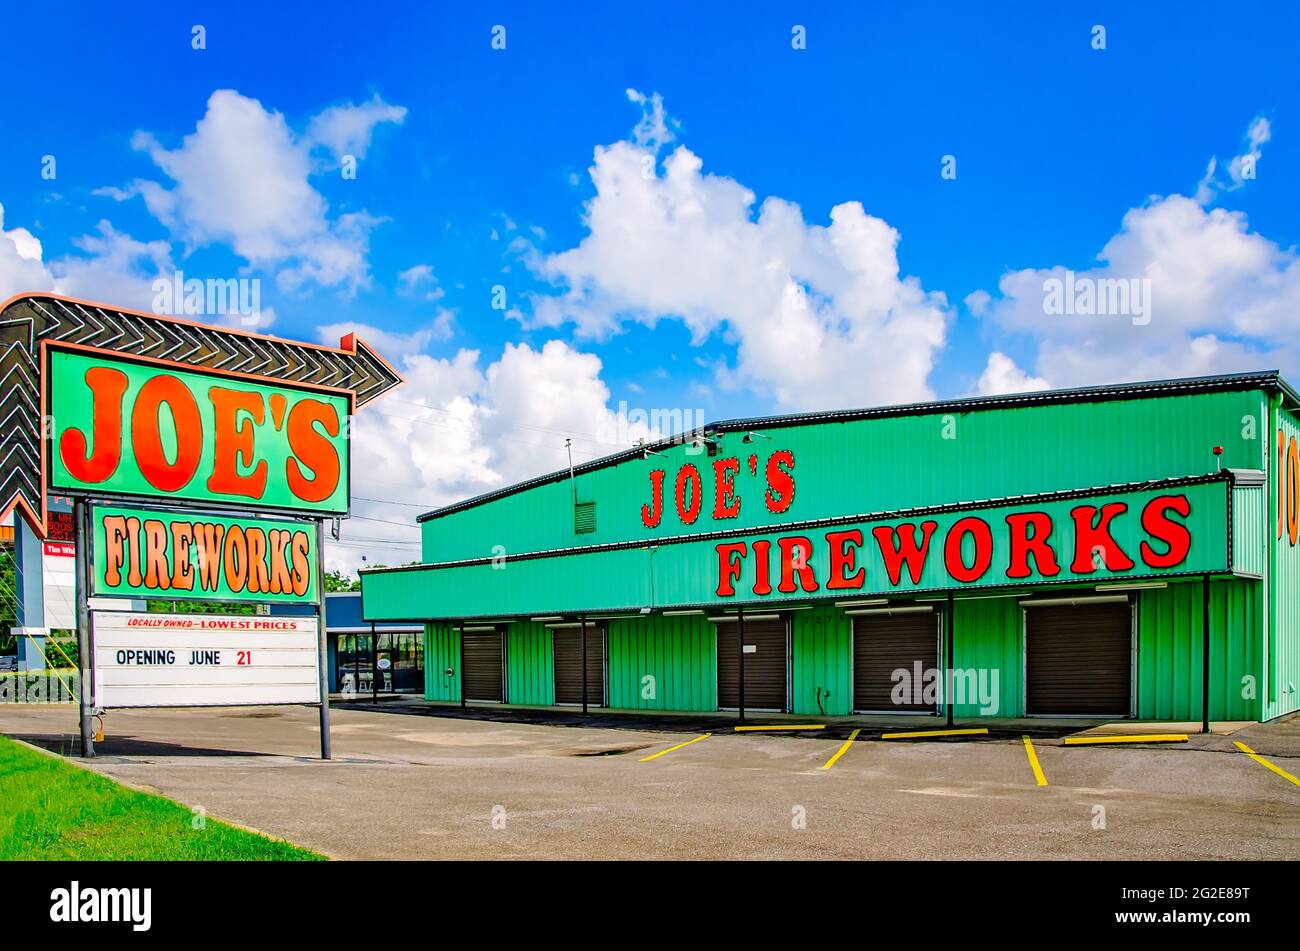 Joe’s Fireworks is pictured, June 9, 2021, in Theodore, Alabama. Roadside fireworks stands are a popular sight in the American South. Stock Photo